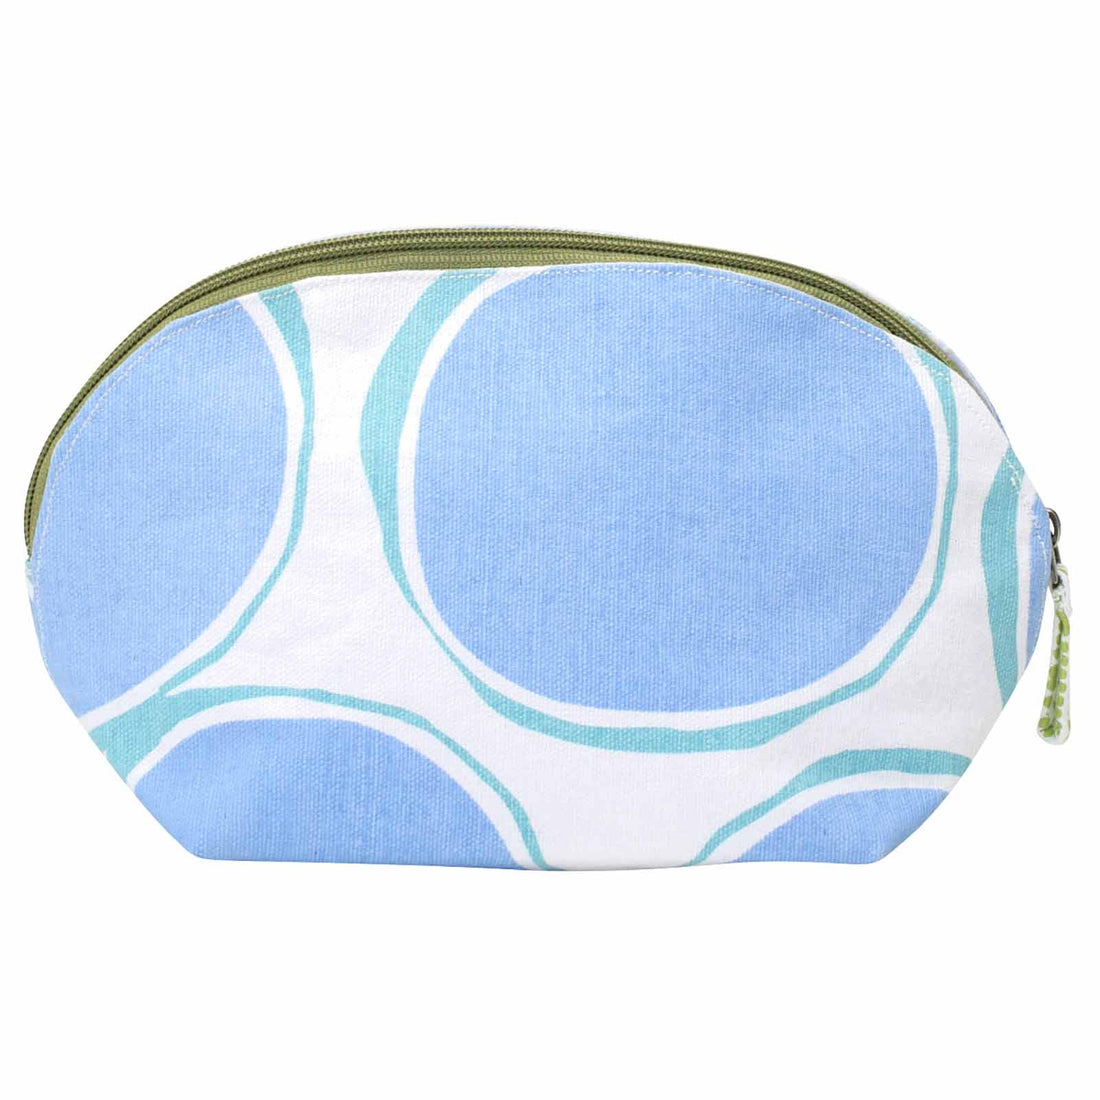 Roray large Cosmetic Bag Pouch - rockflowerpaper